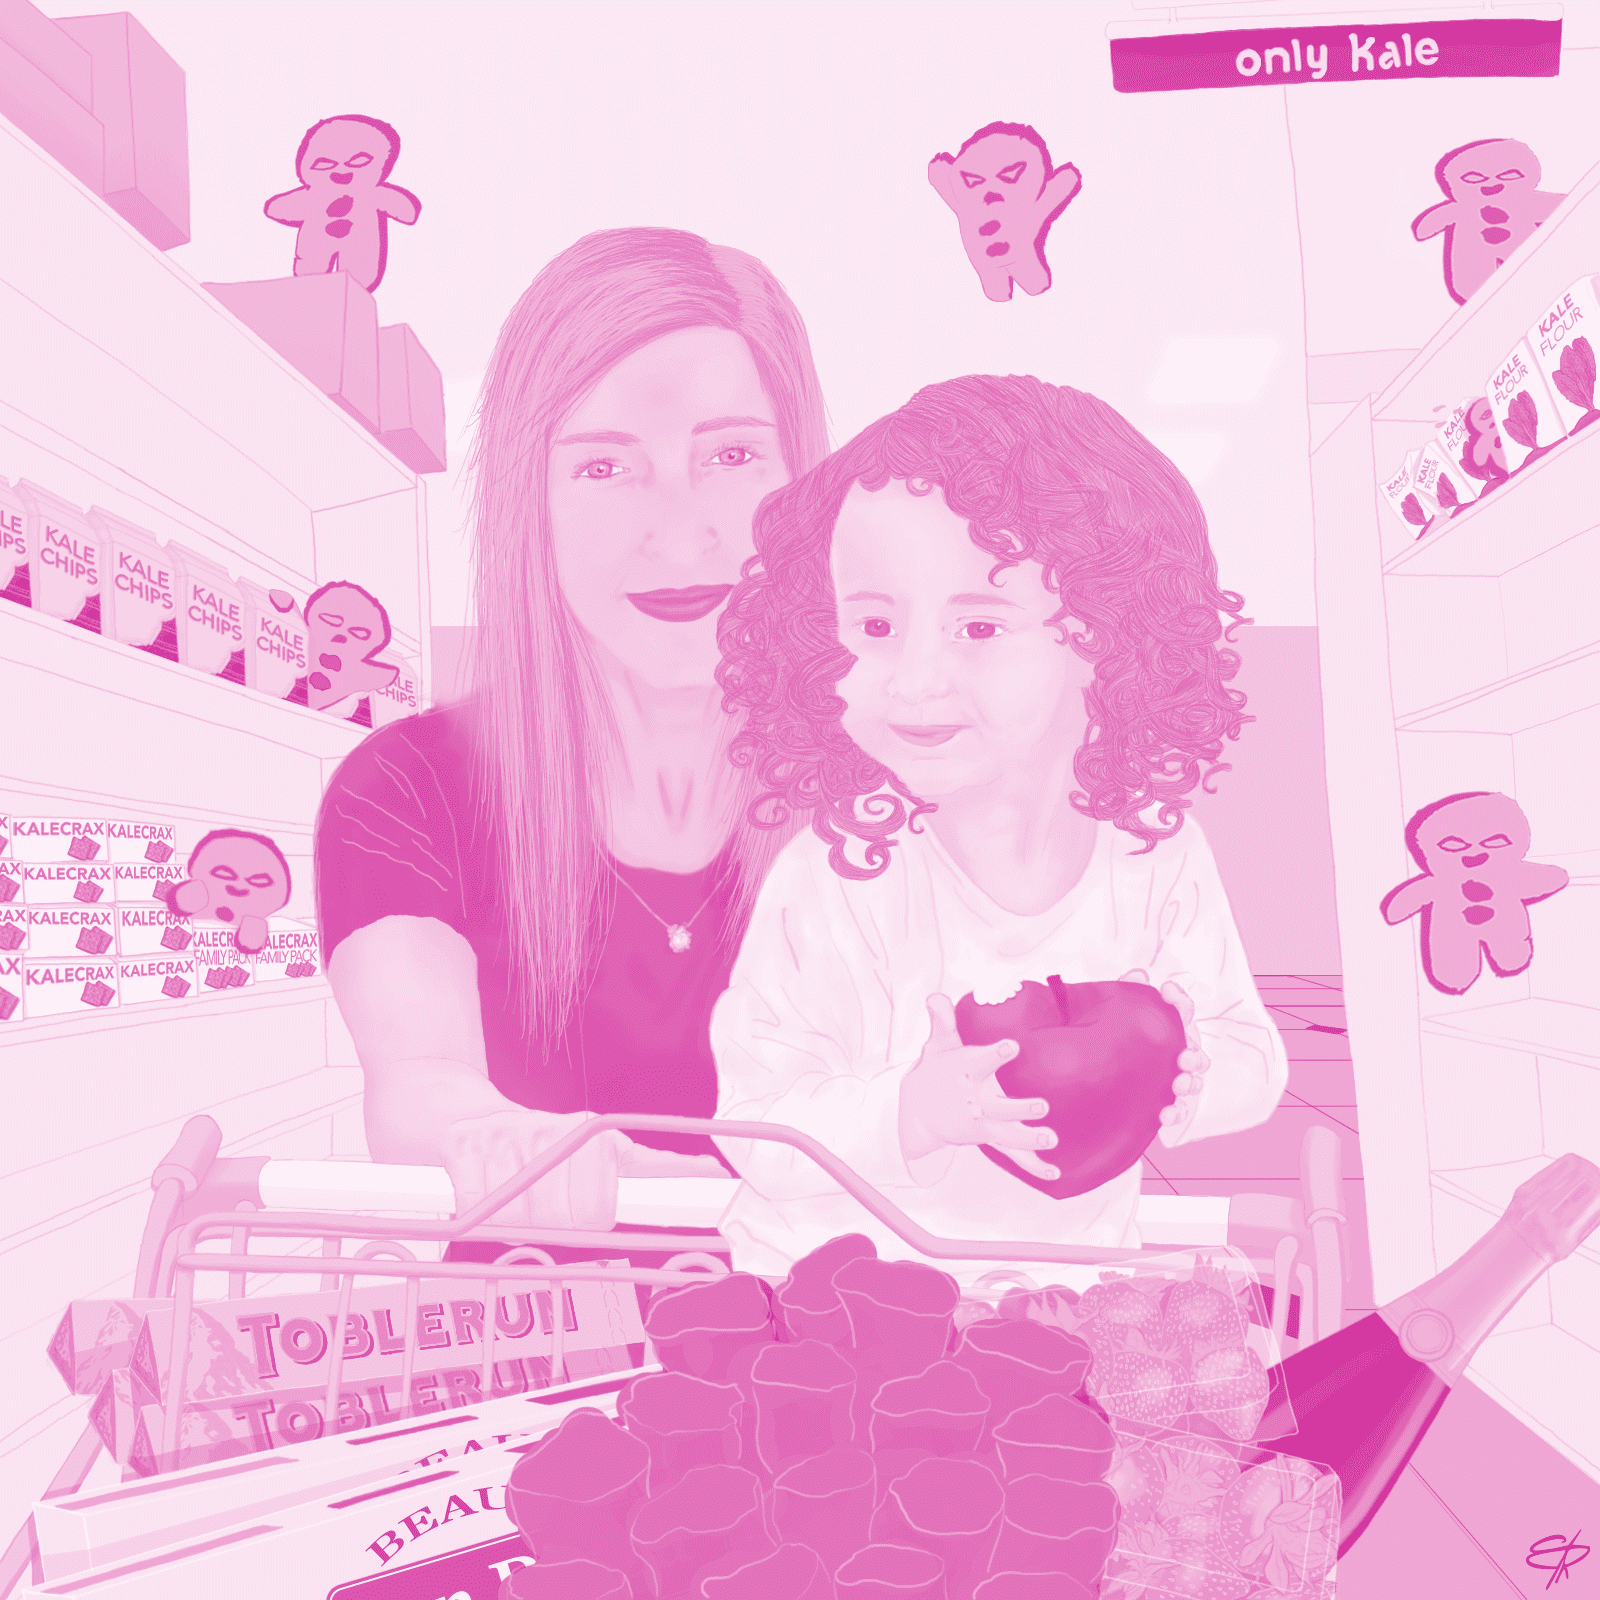 Monochrome Portrait of a friend and her daugther in a fictional Kale Invasion.